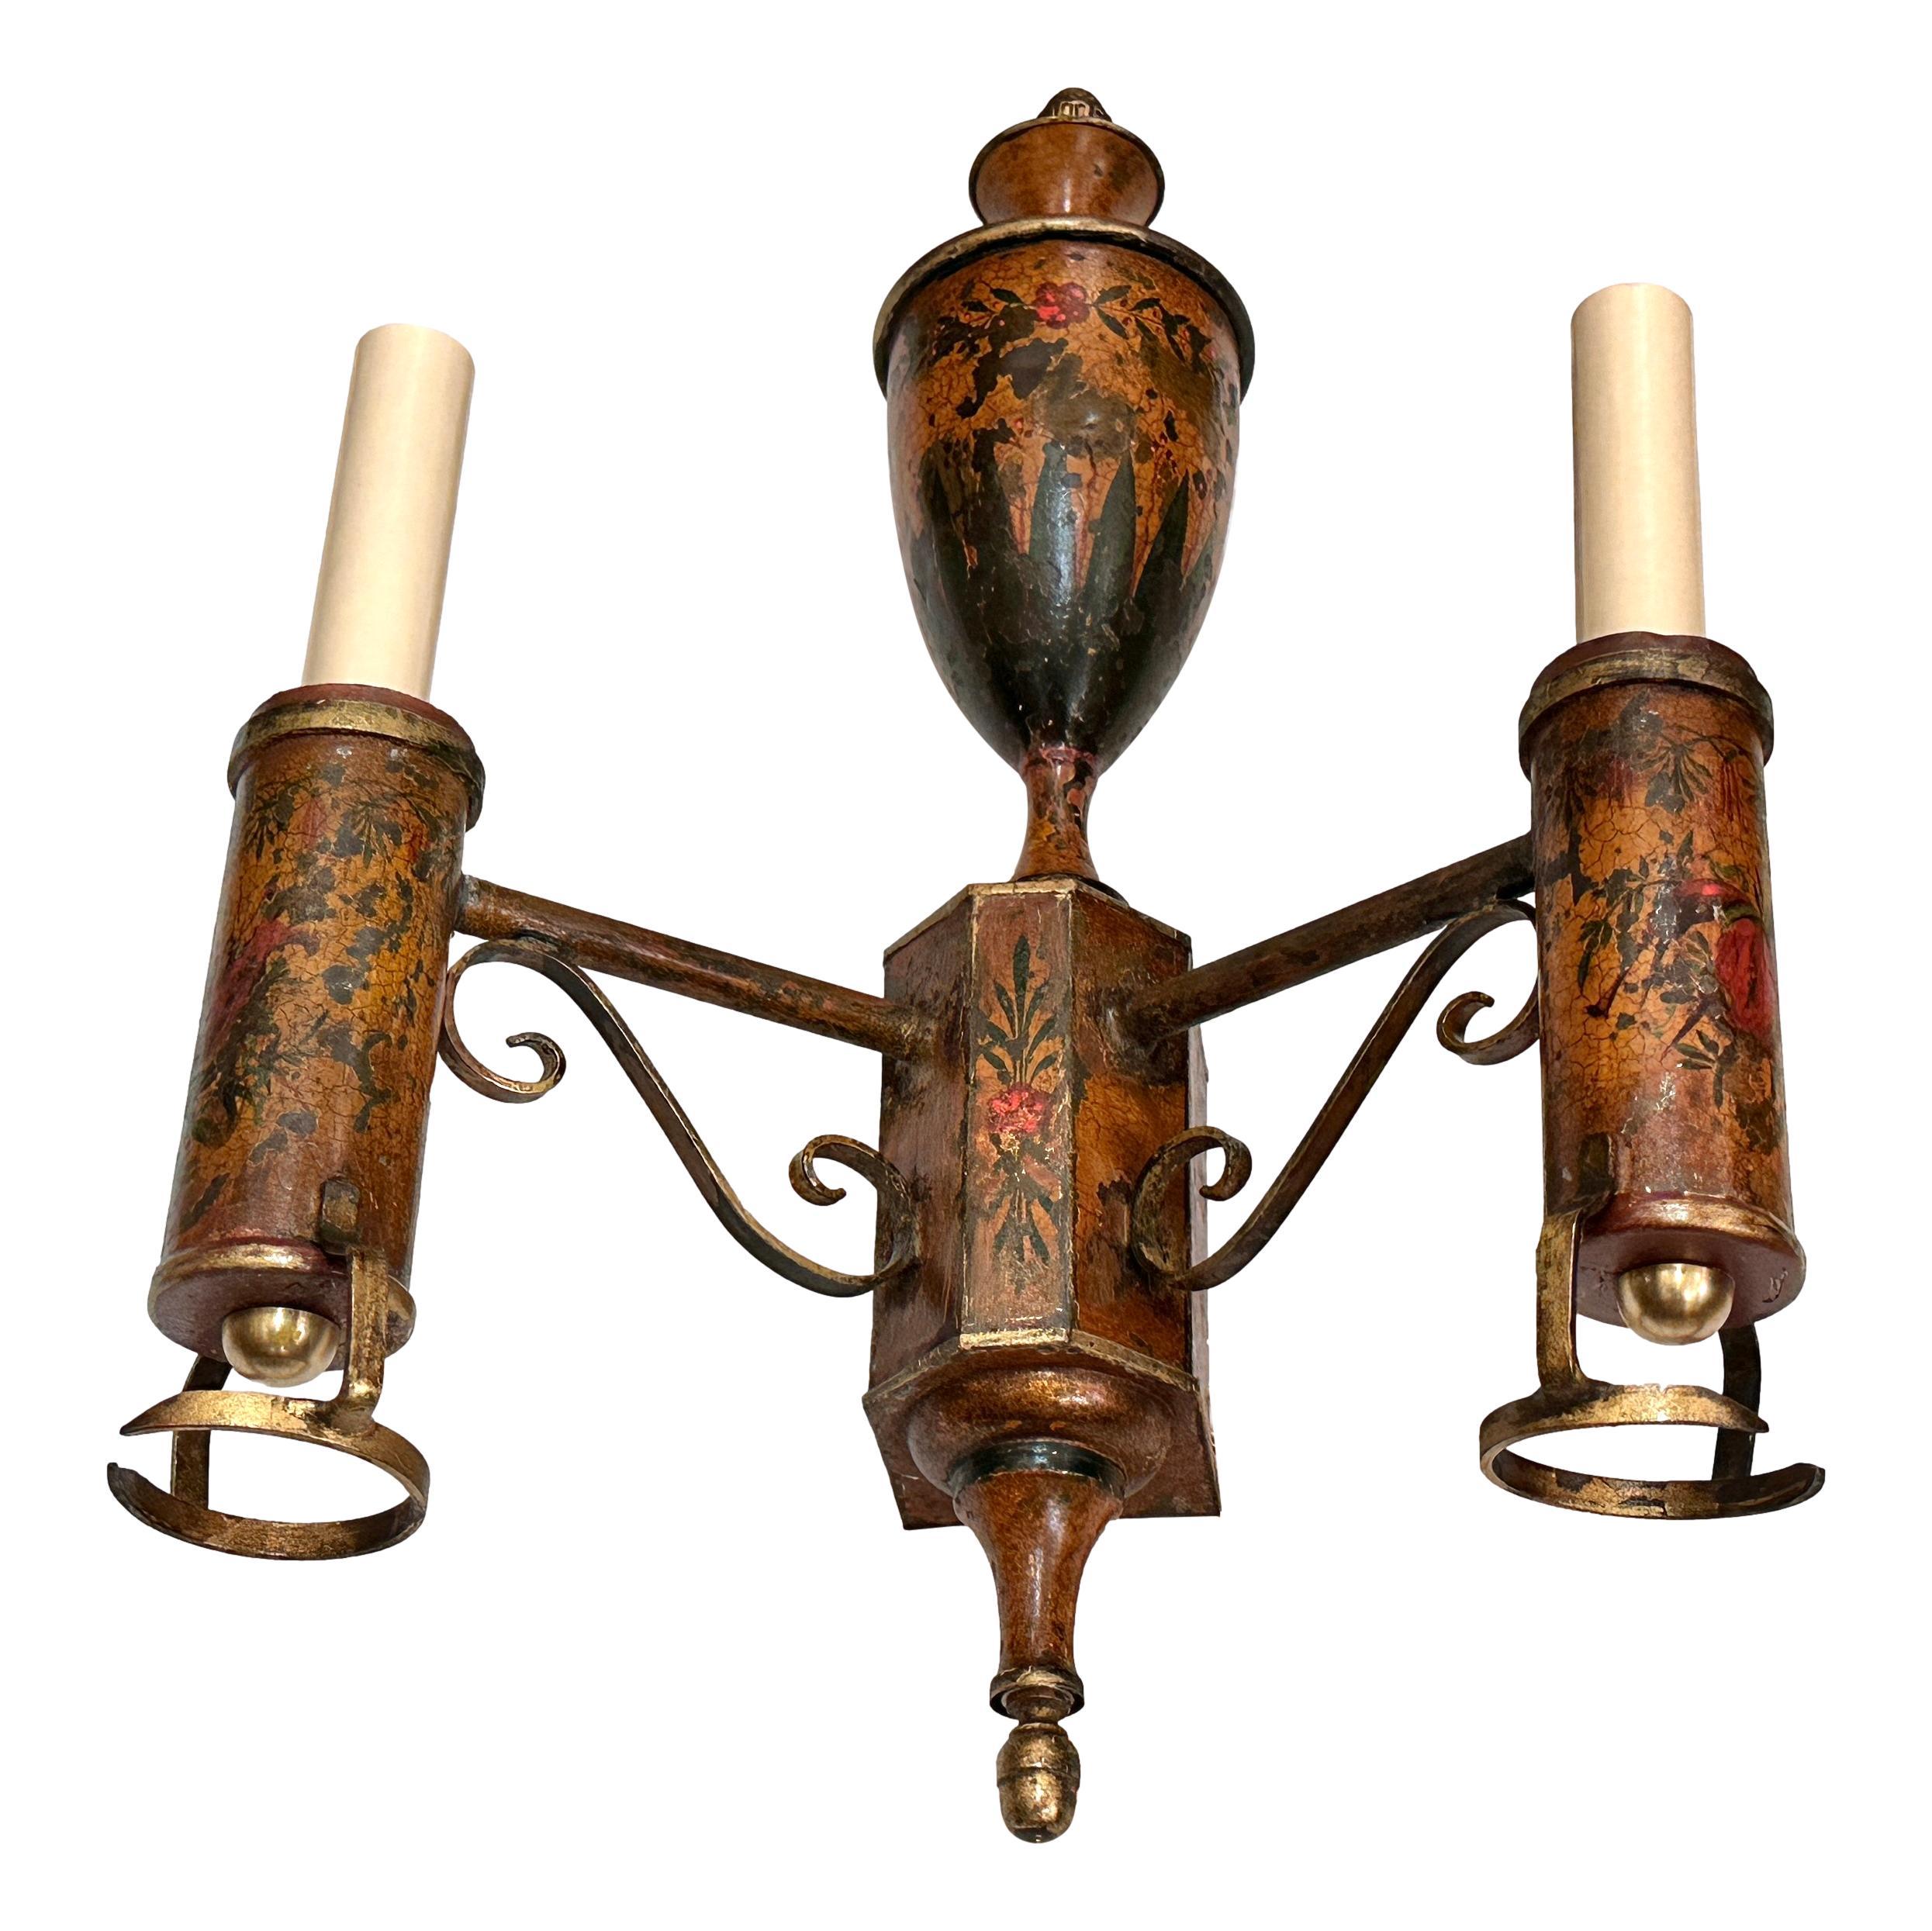 A late 19th Century French painted tole sconce with foliage decoration.

Measurements:
Height: 17